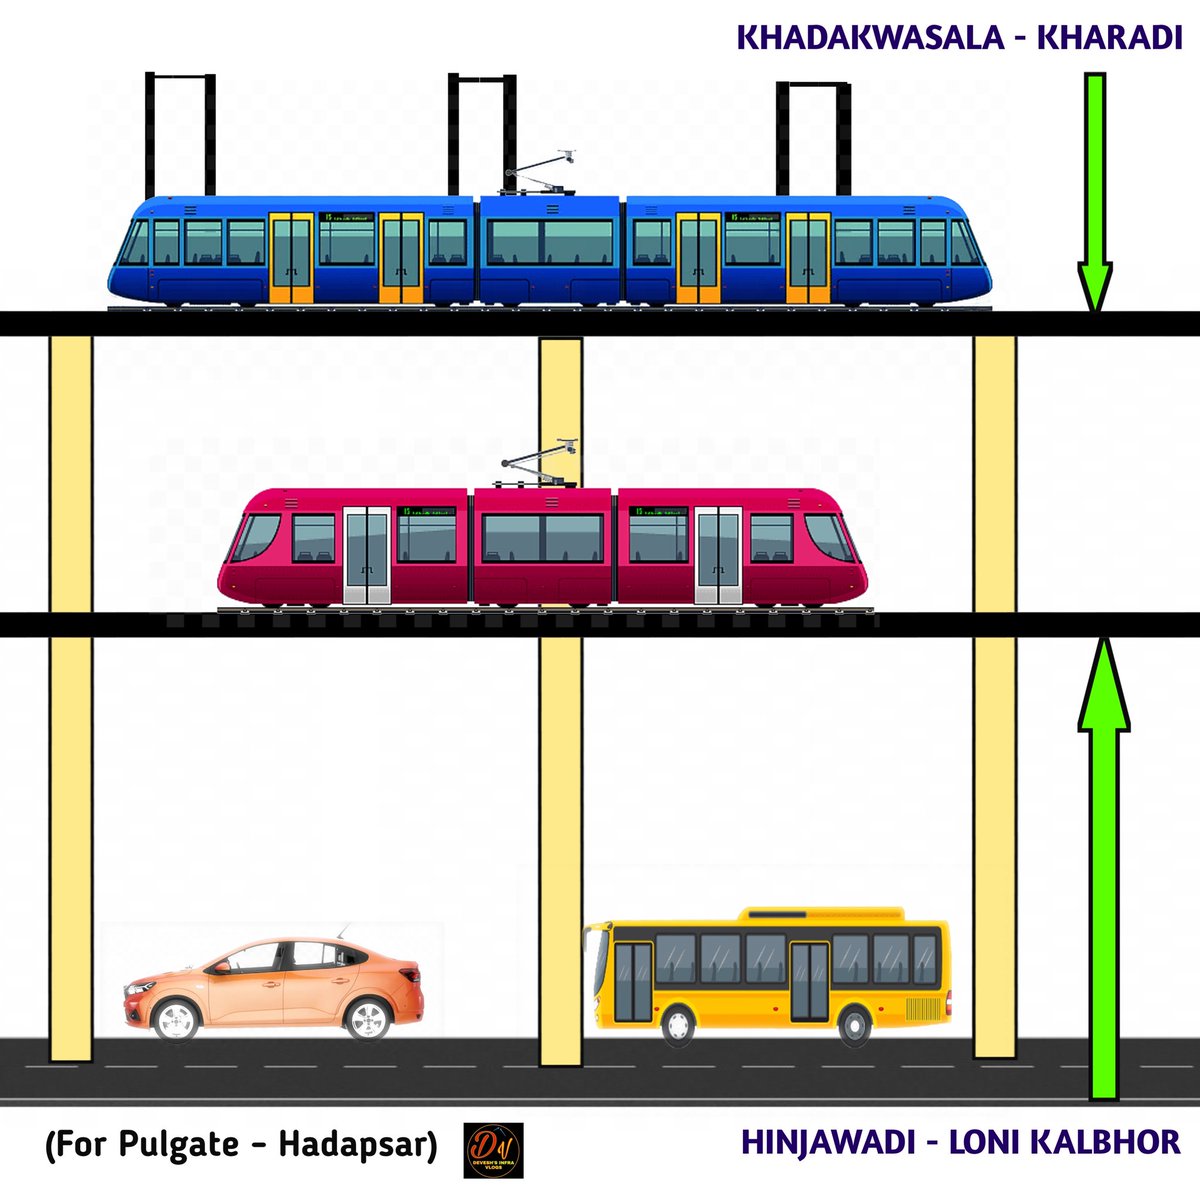 #Thread 
In Pune Metro Phase 2 the Hinjawadi - Civil Court line will be extended to Loni Kalbhor & a new line Khadakwasala - Swargate - Hadapsar - Kharadi is also going to be built

Pulgate - Hadapsar is a common stretch for both these metro lines

Read the next tweet #Contd